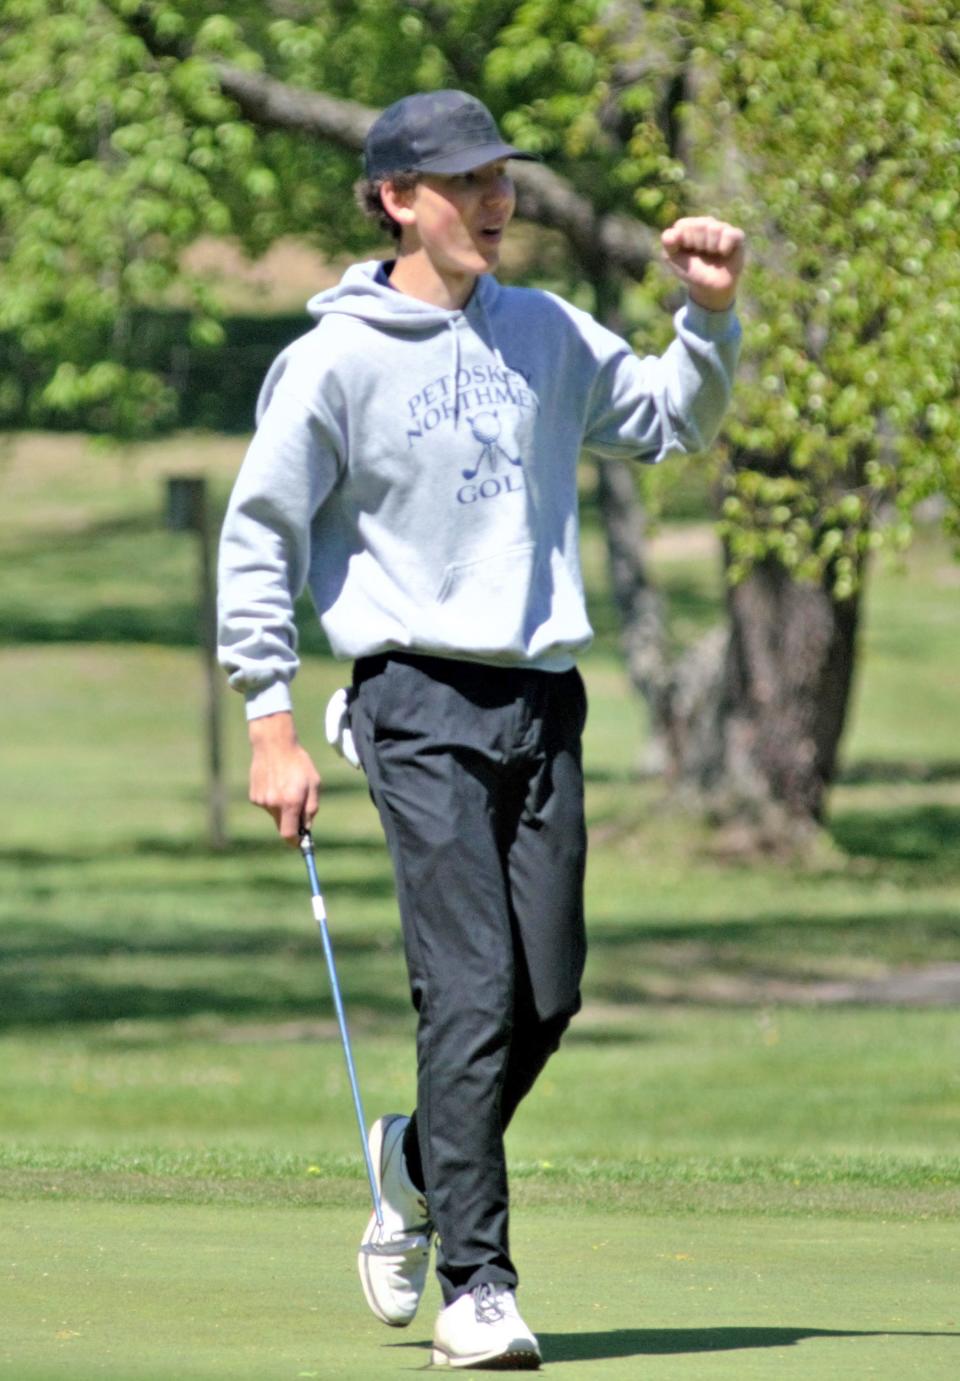 Petoskey's Nolan Jarvis celebrates a successful putt on Wednesday in Gaylord.